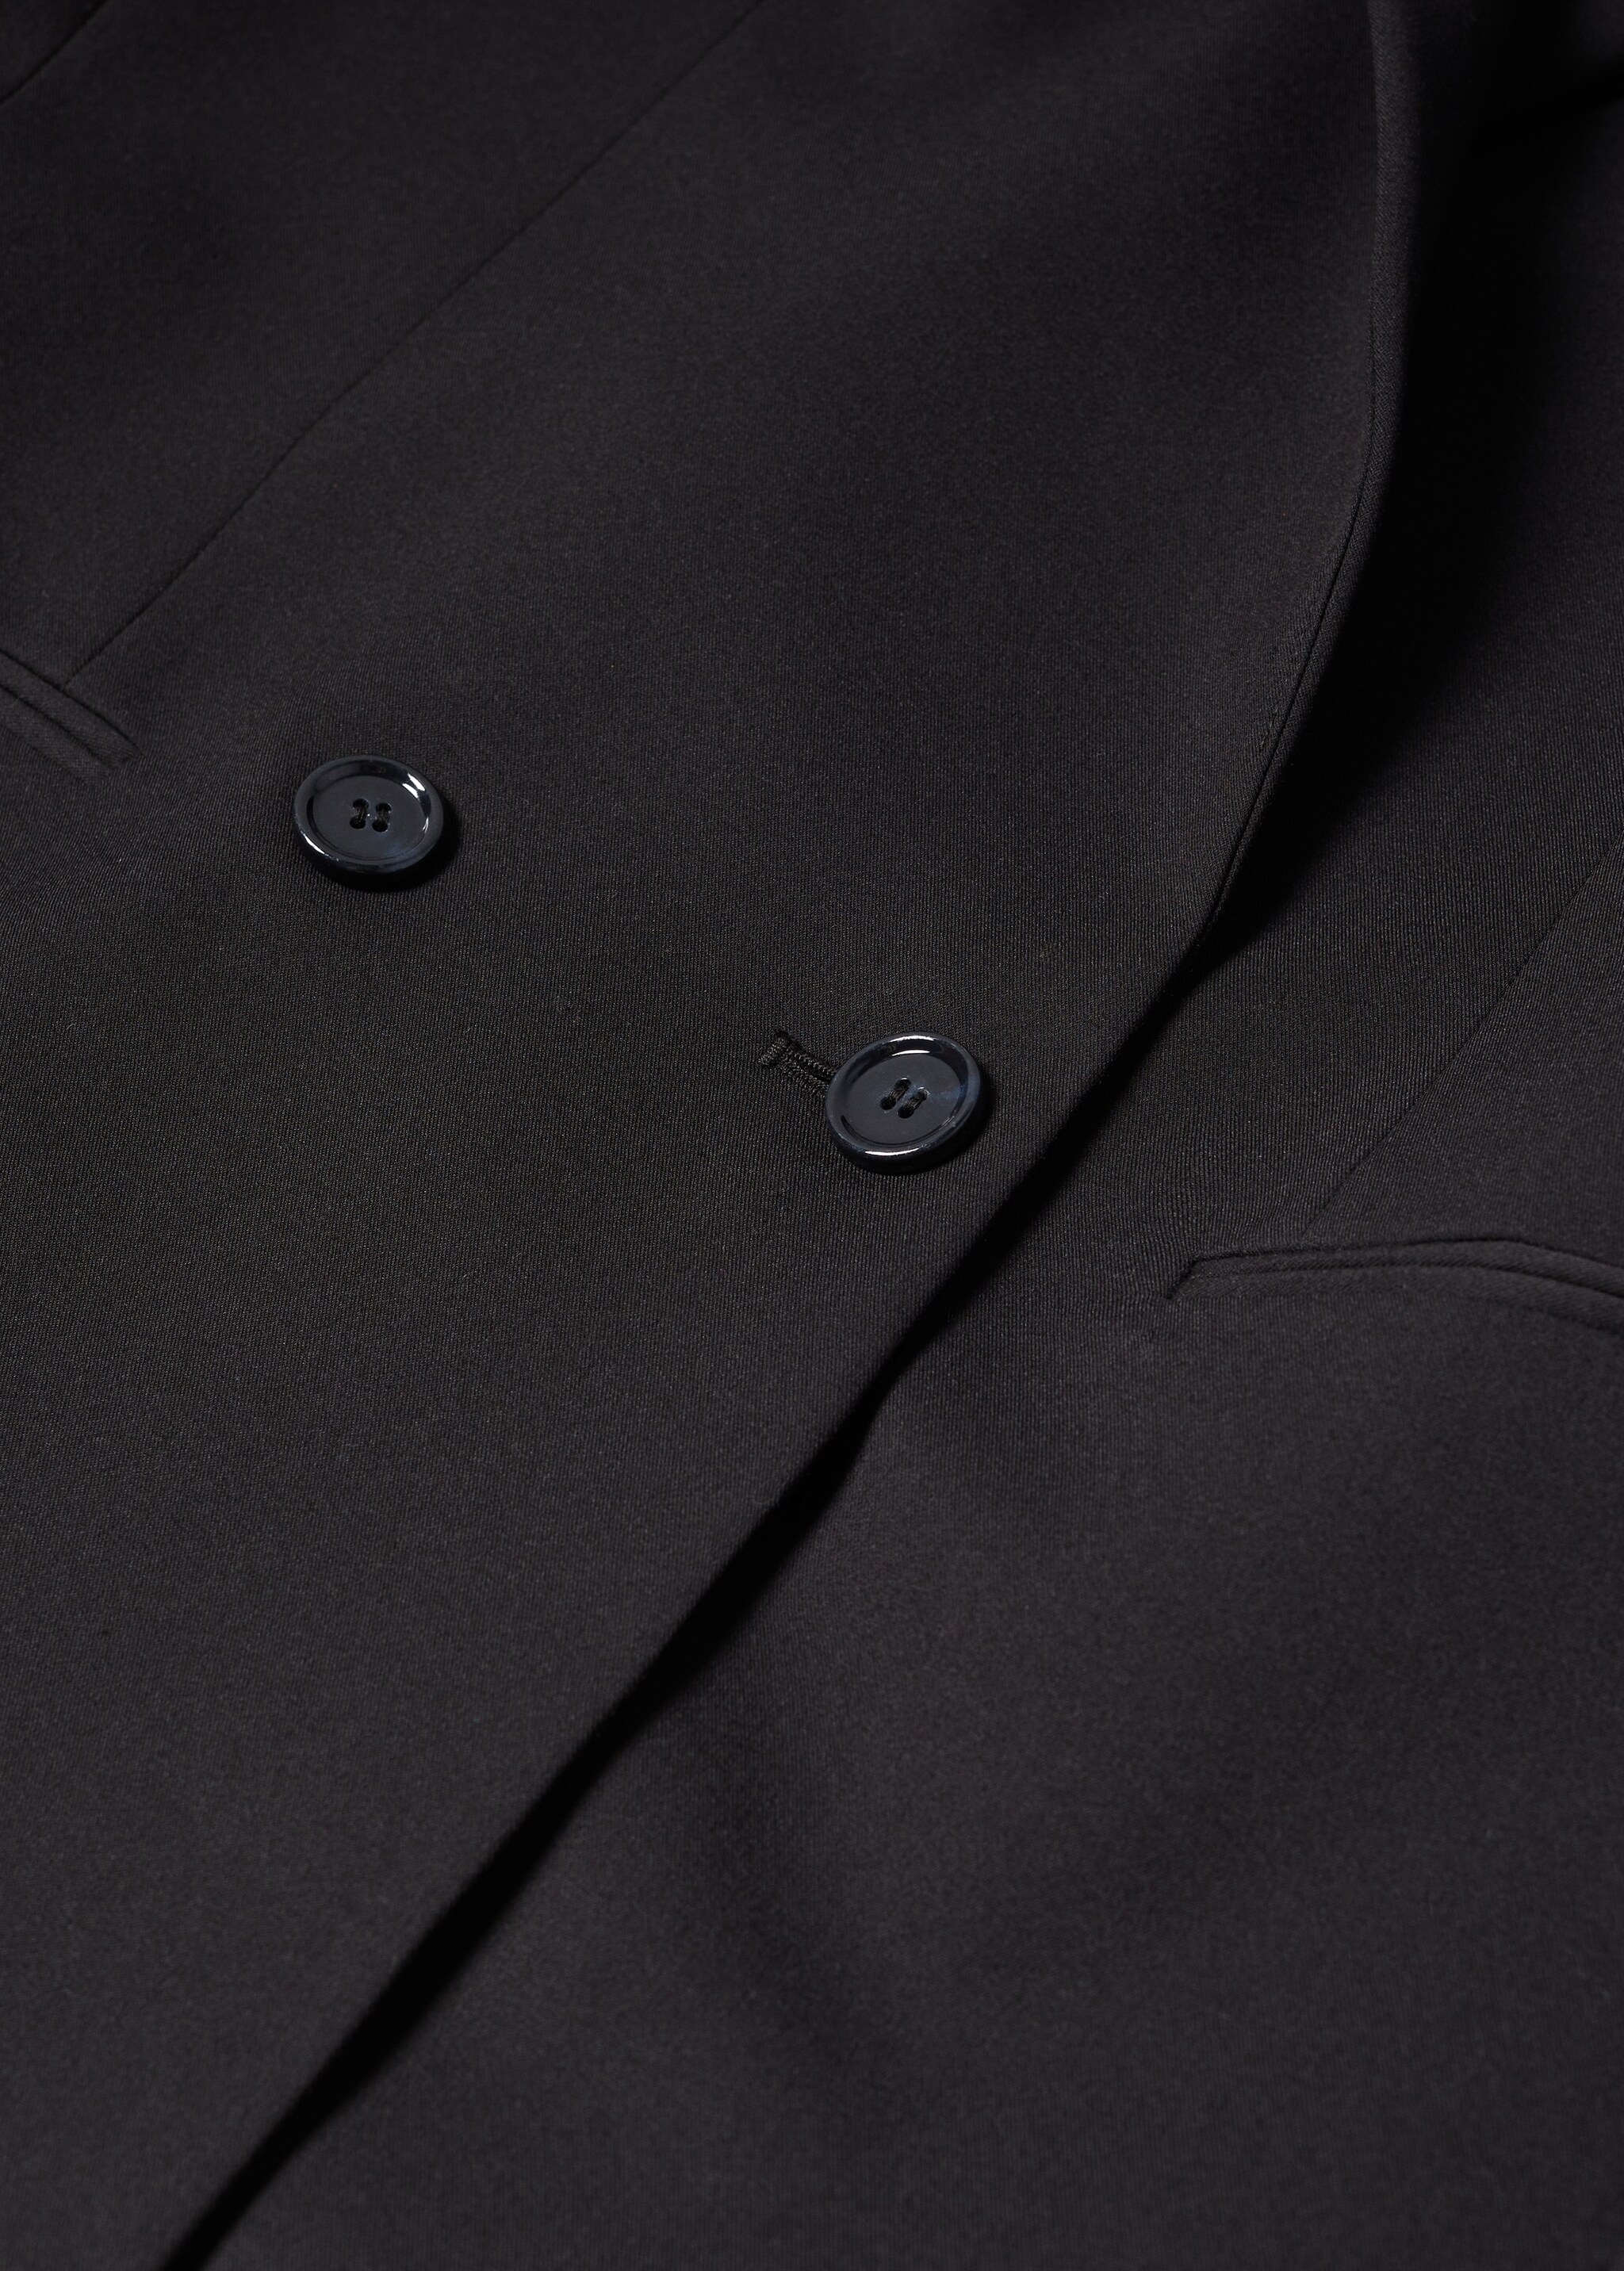 Double-breasted blazer - Details of the article 8